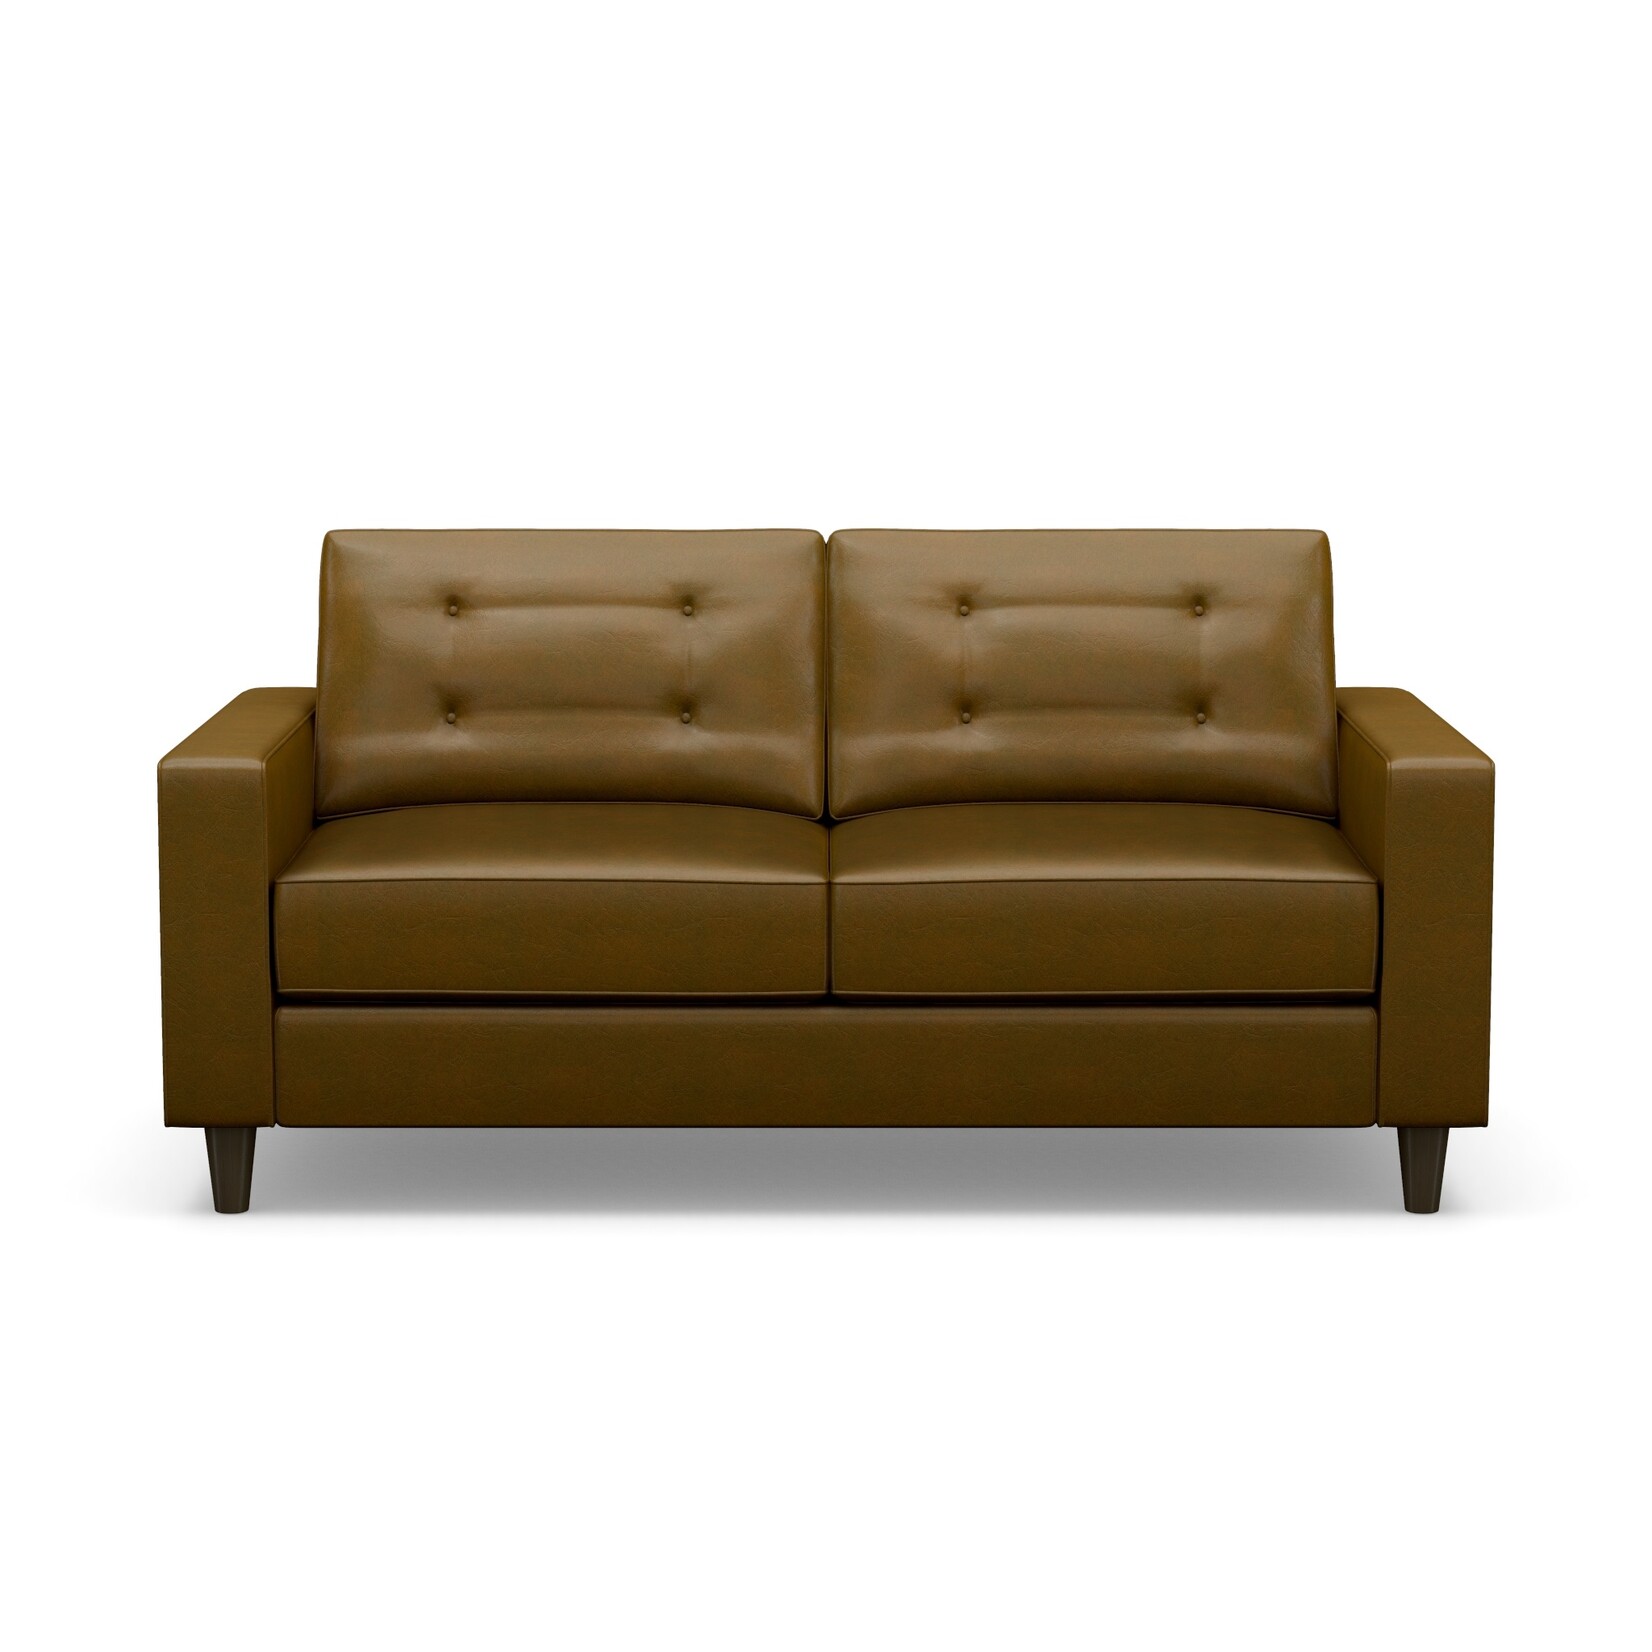 Mickler & Co. Lewis Leather Sofa